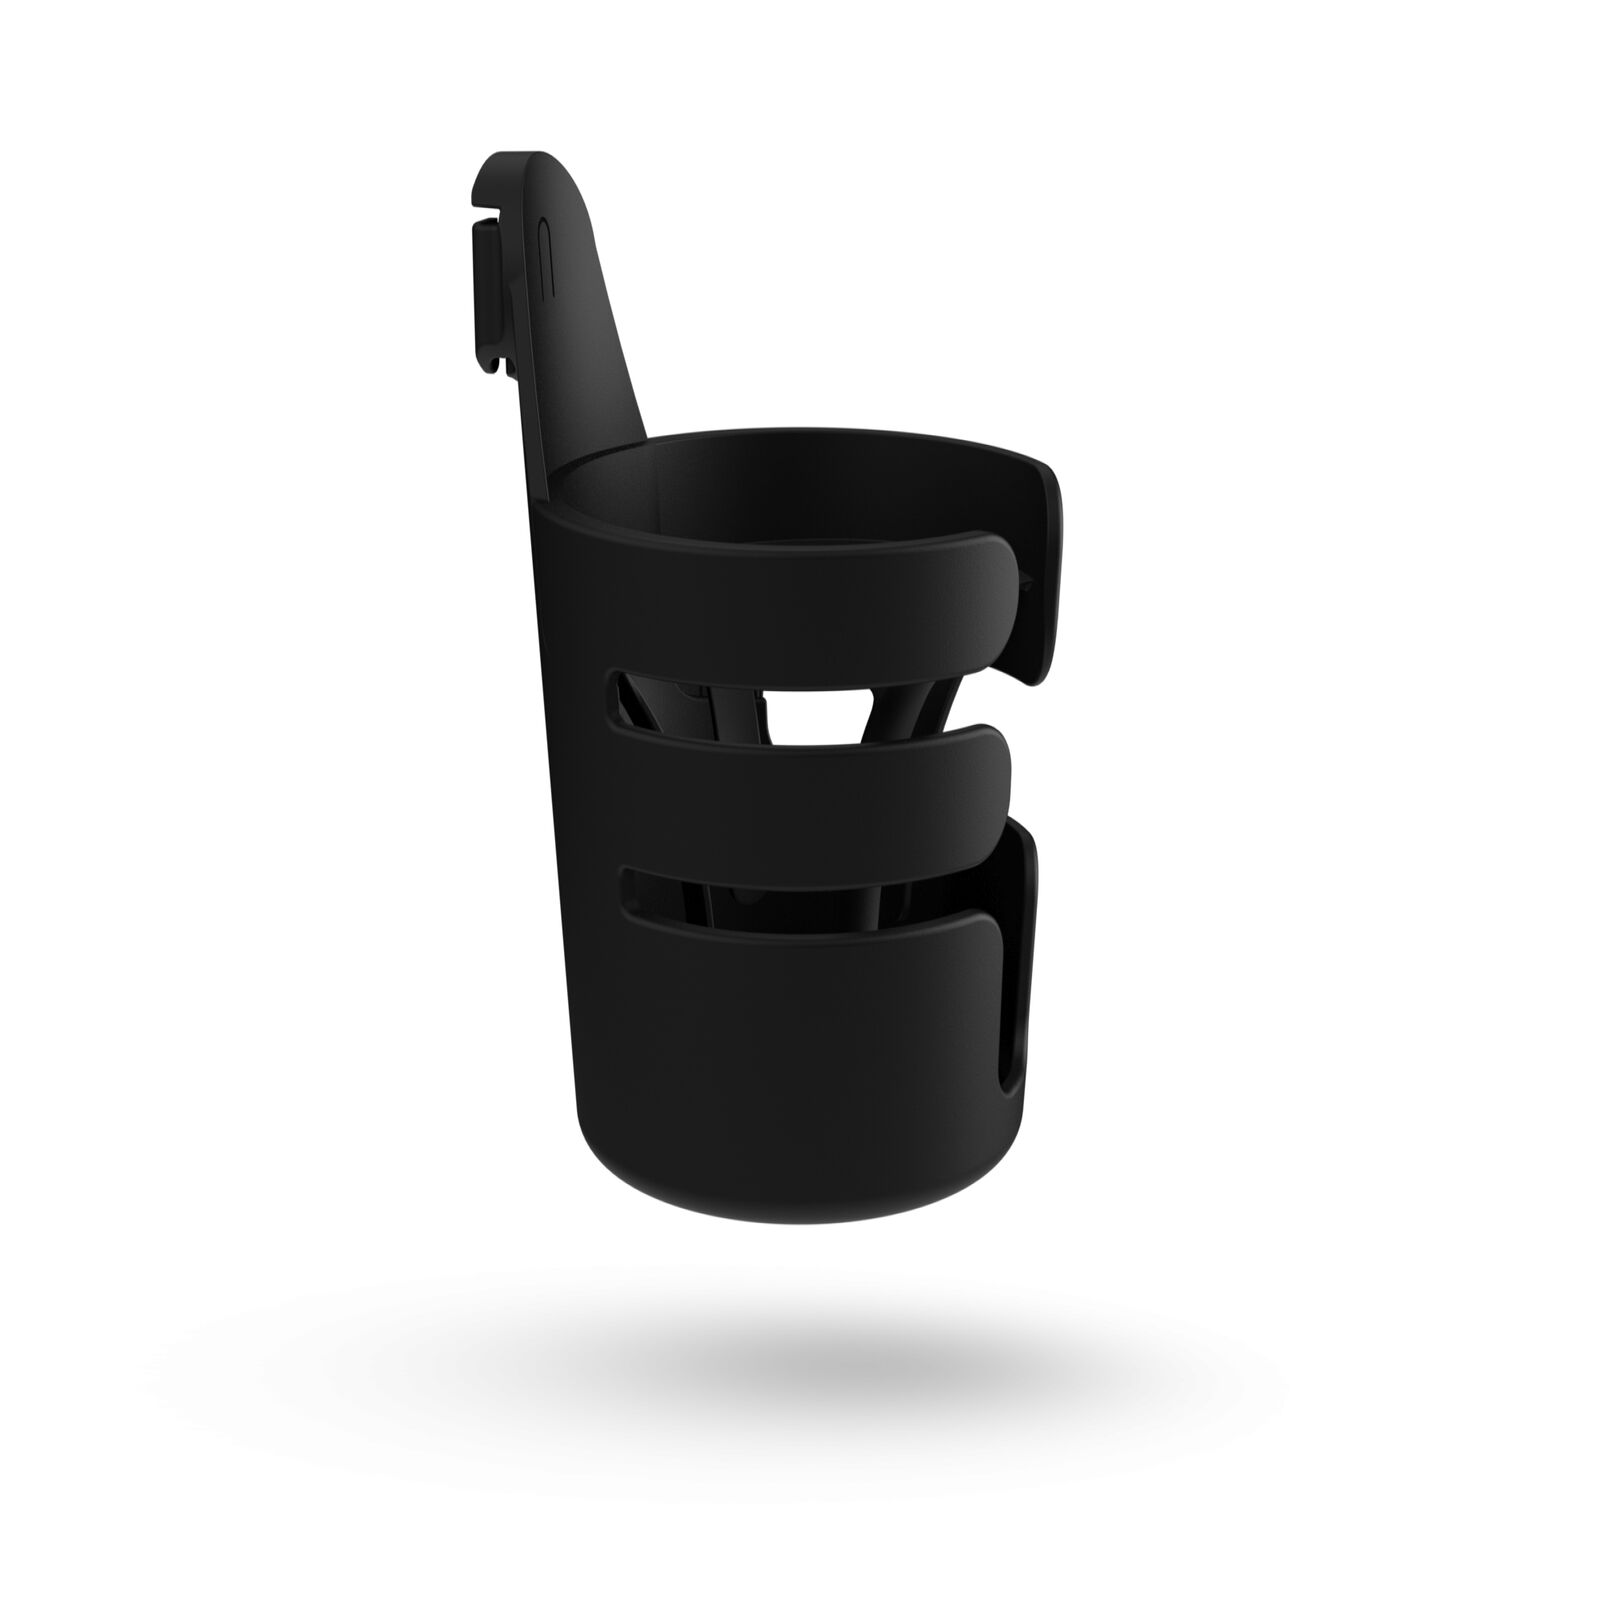 Bugaboo cup holder - View 1